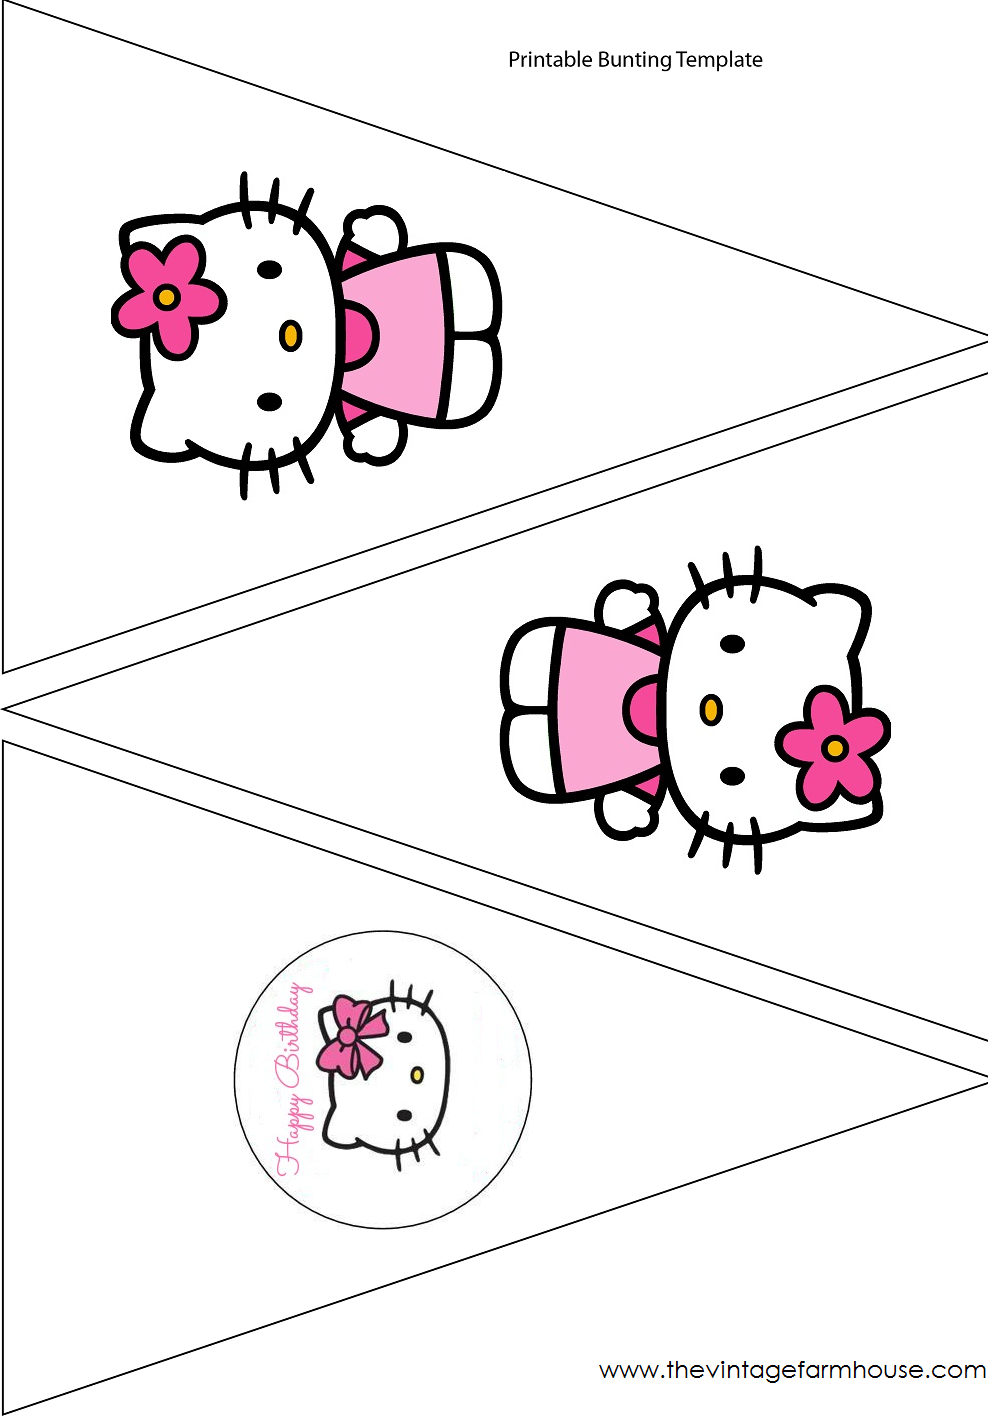 Simple Cute Hello Kitty Free Printable Kit. – Oh My Fiesta With Hello Kitty Birthday Banner Template Free